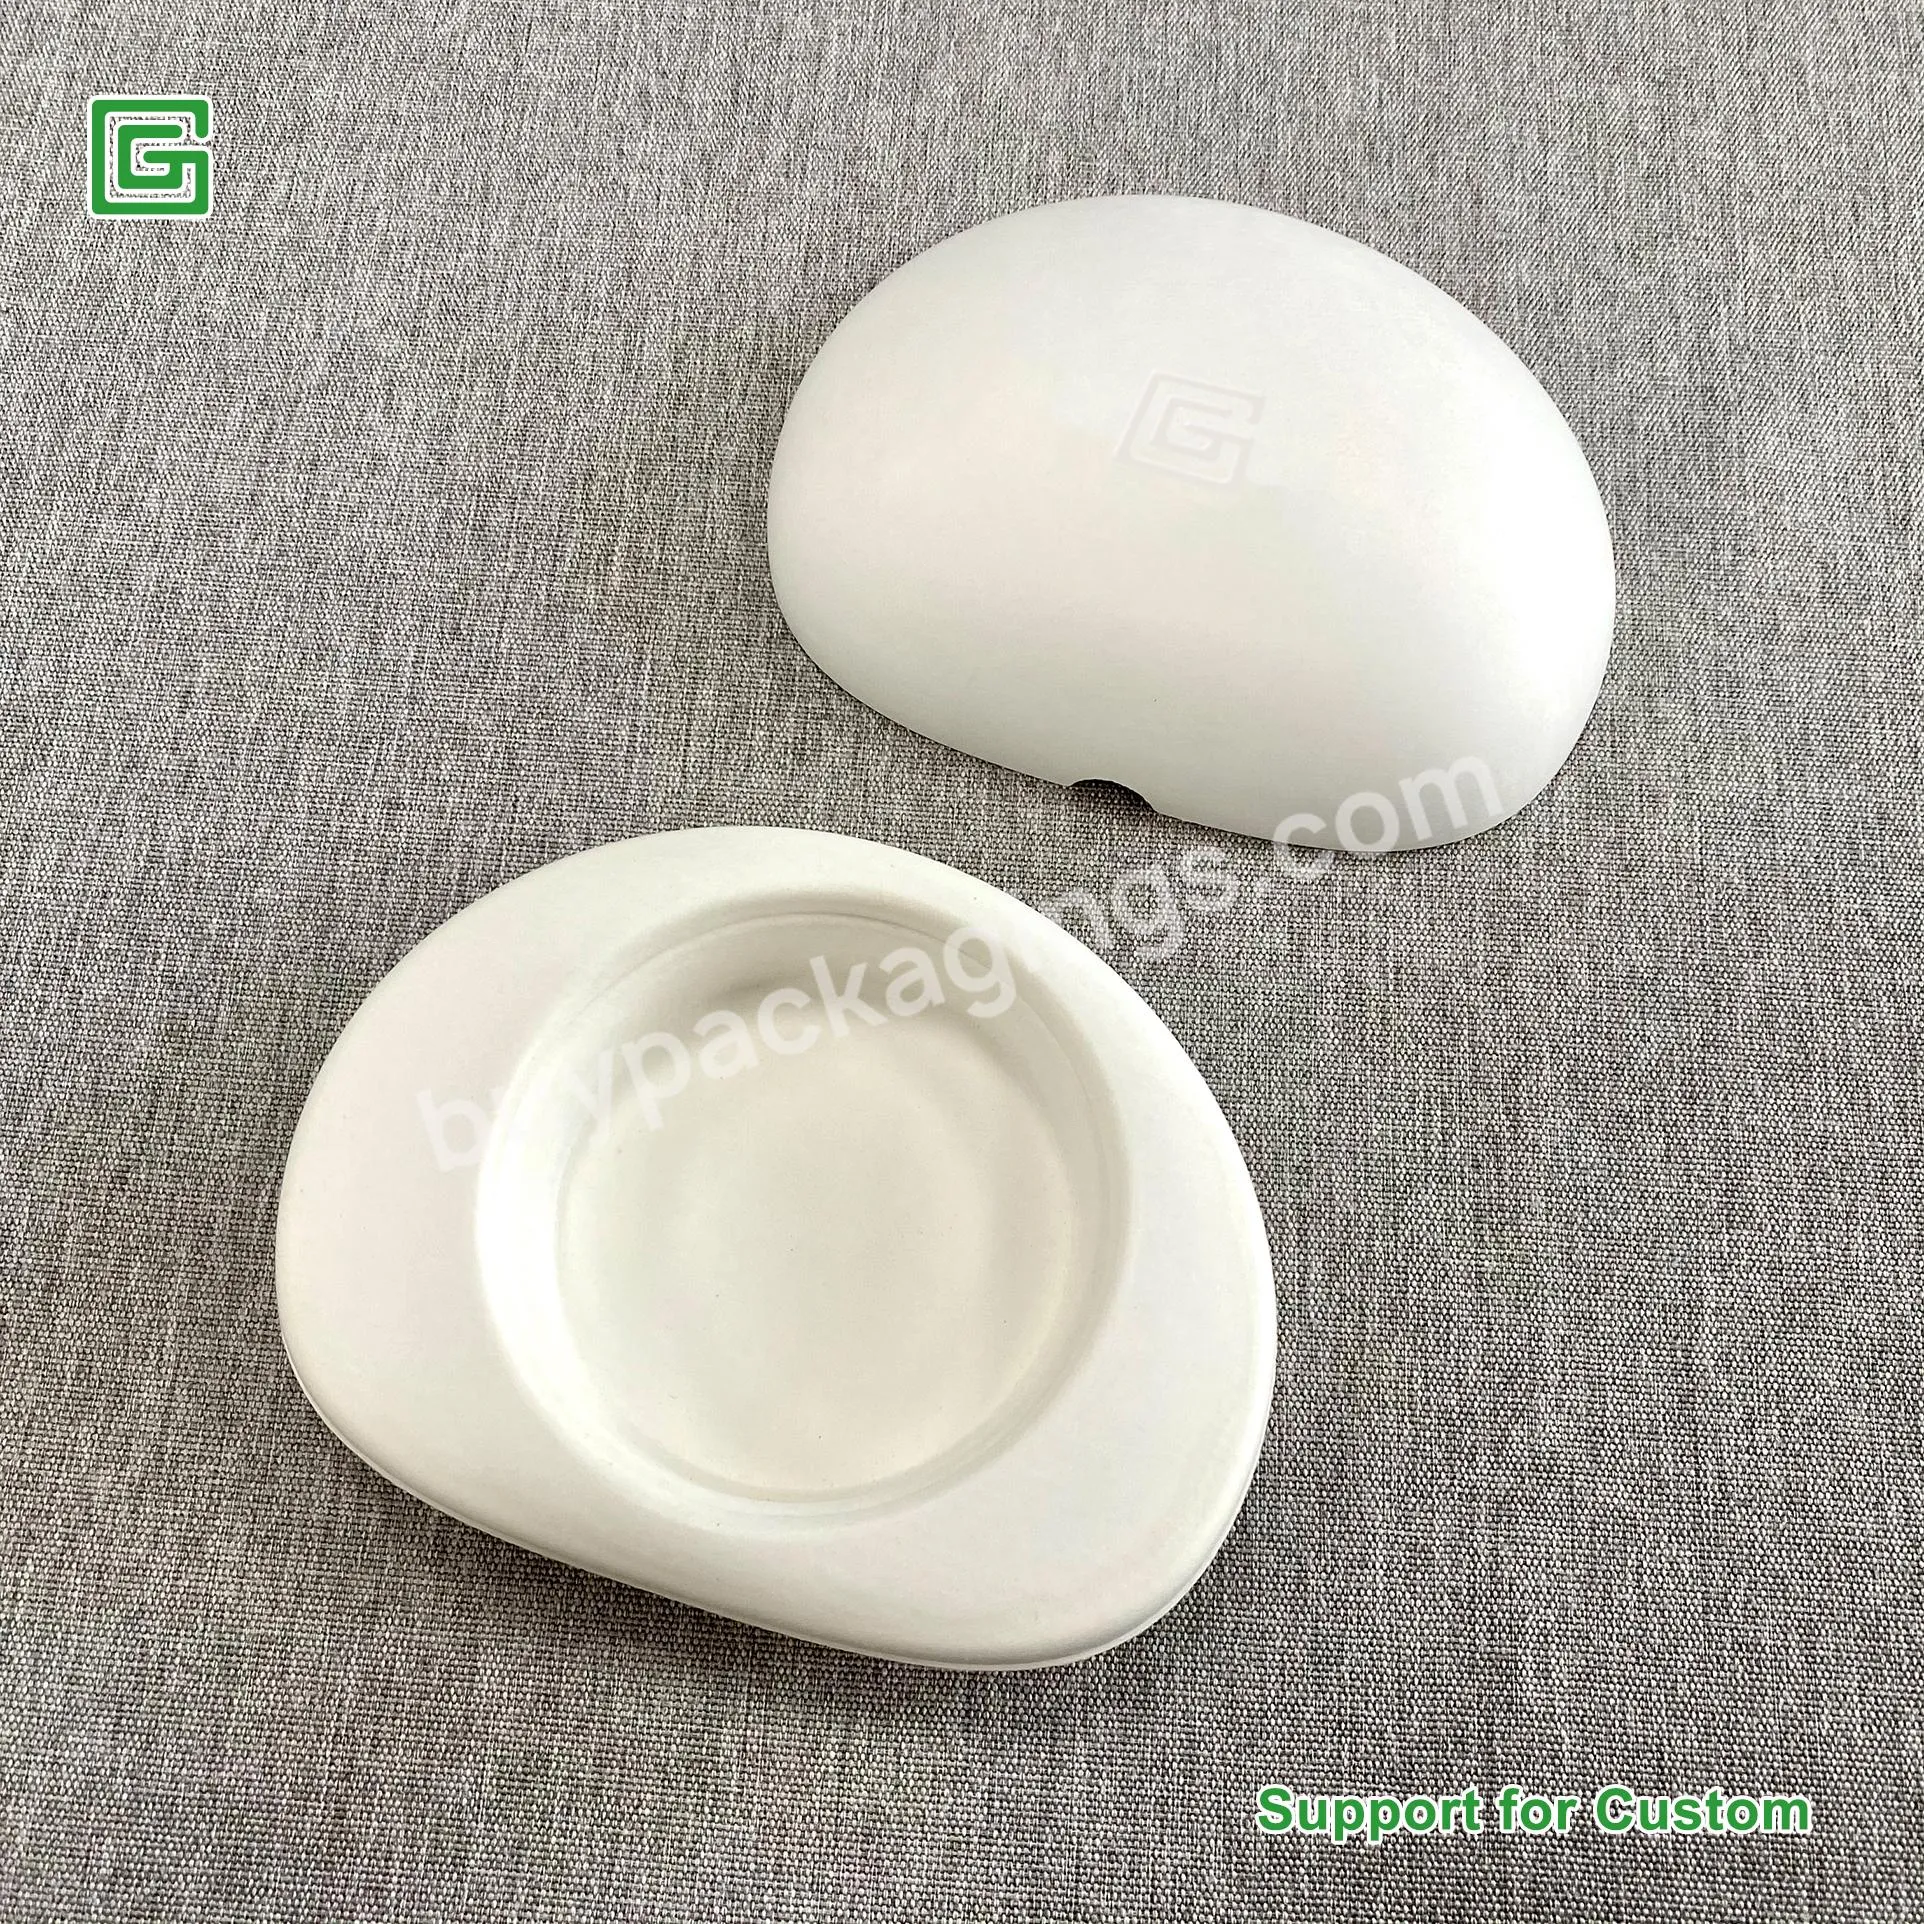 Popular Design Wet Press Embossing Foil Stamping Bagasse Gift Paper Molded Pulp Box Packaging - Buy Clear Printed Packing Box,Insert Tray Packaging,Biodegradable Pulp And Paper Packaging.